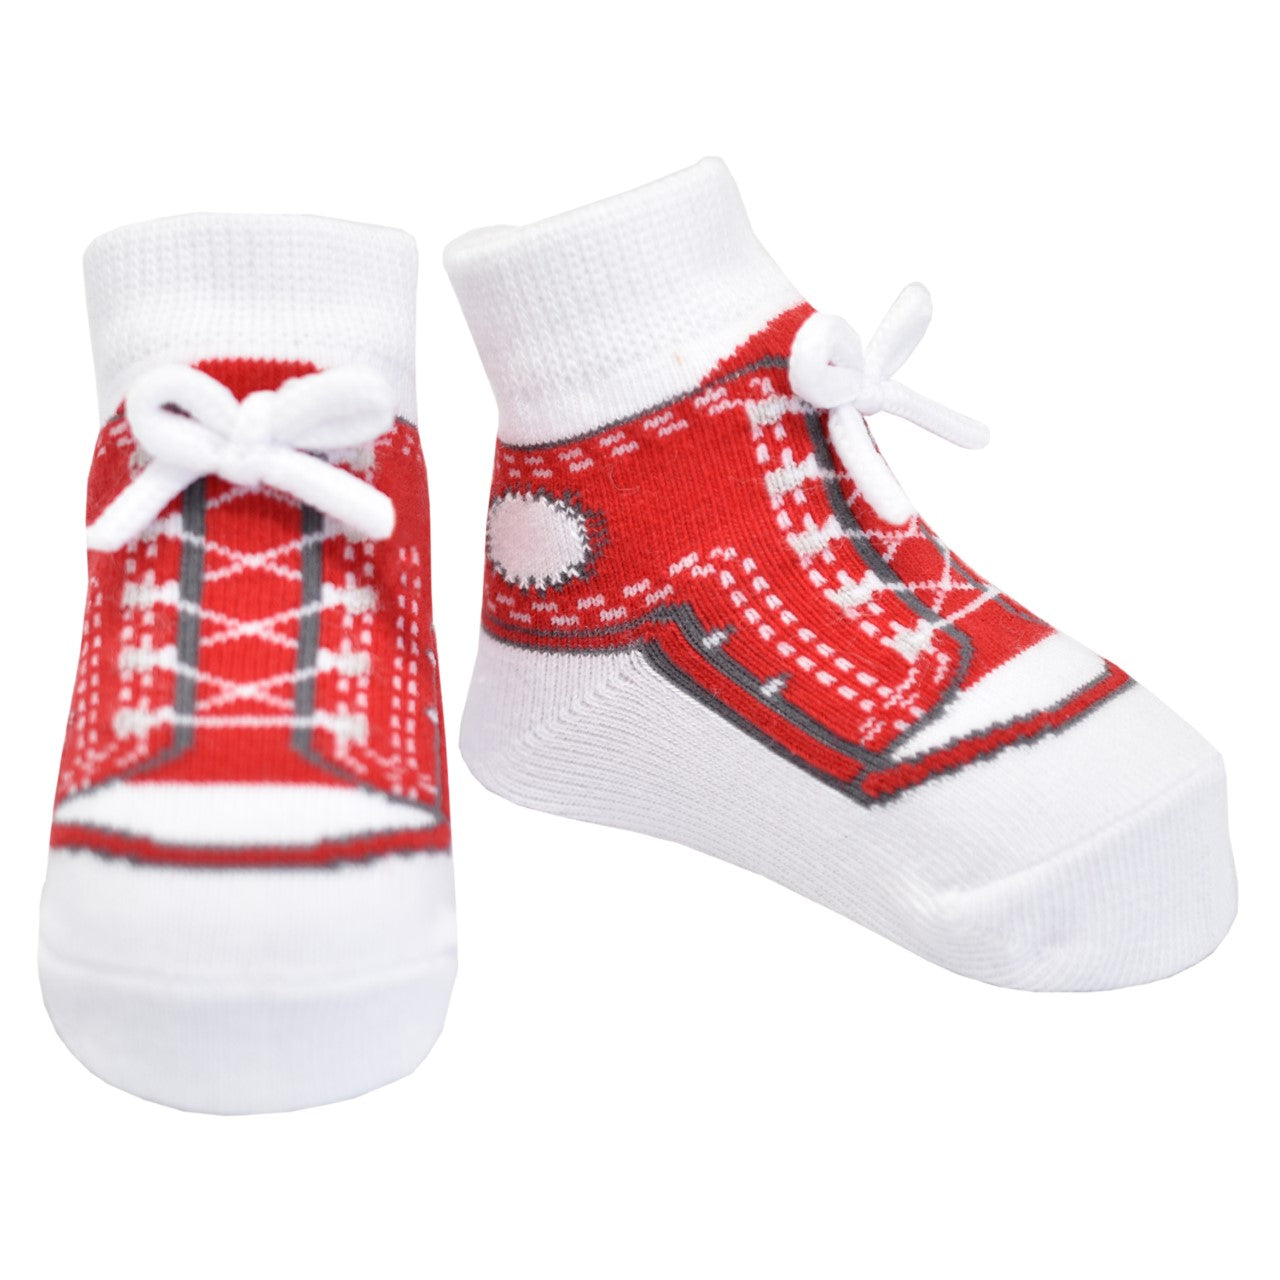 Red baby boy sneaker socks that look like shoes with faux shoelaces